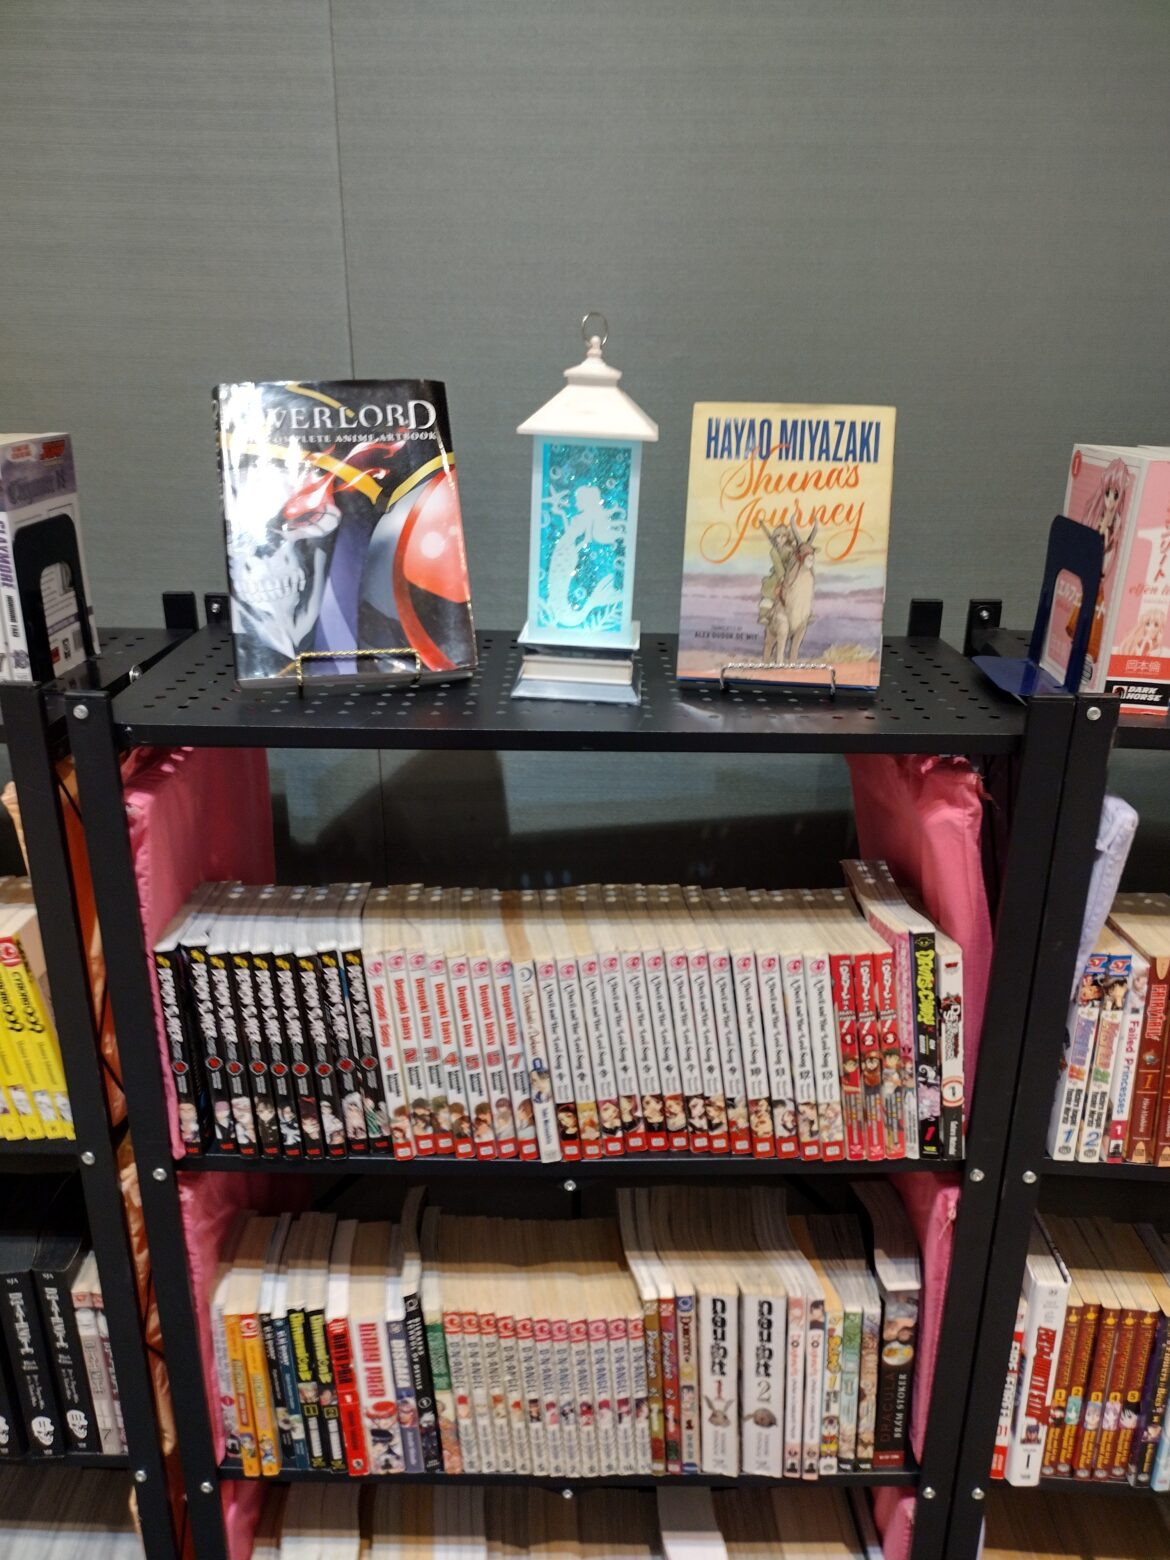 Interview with the Carolina Manga Library